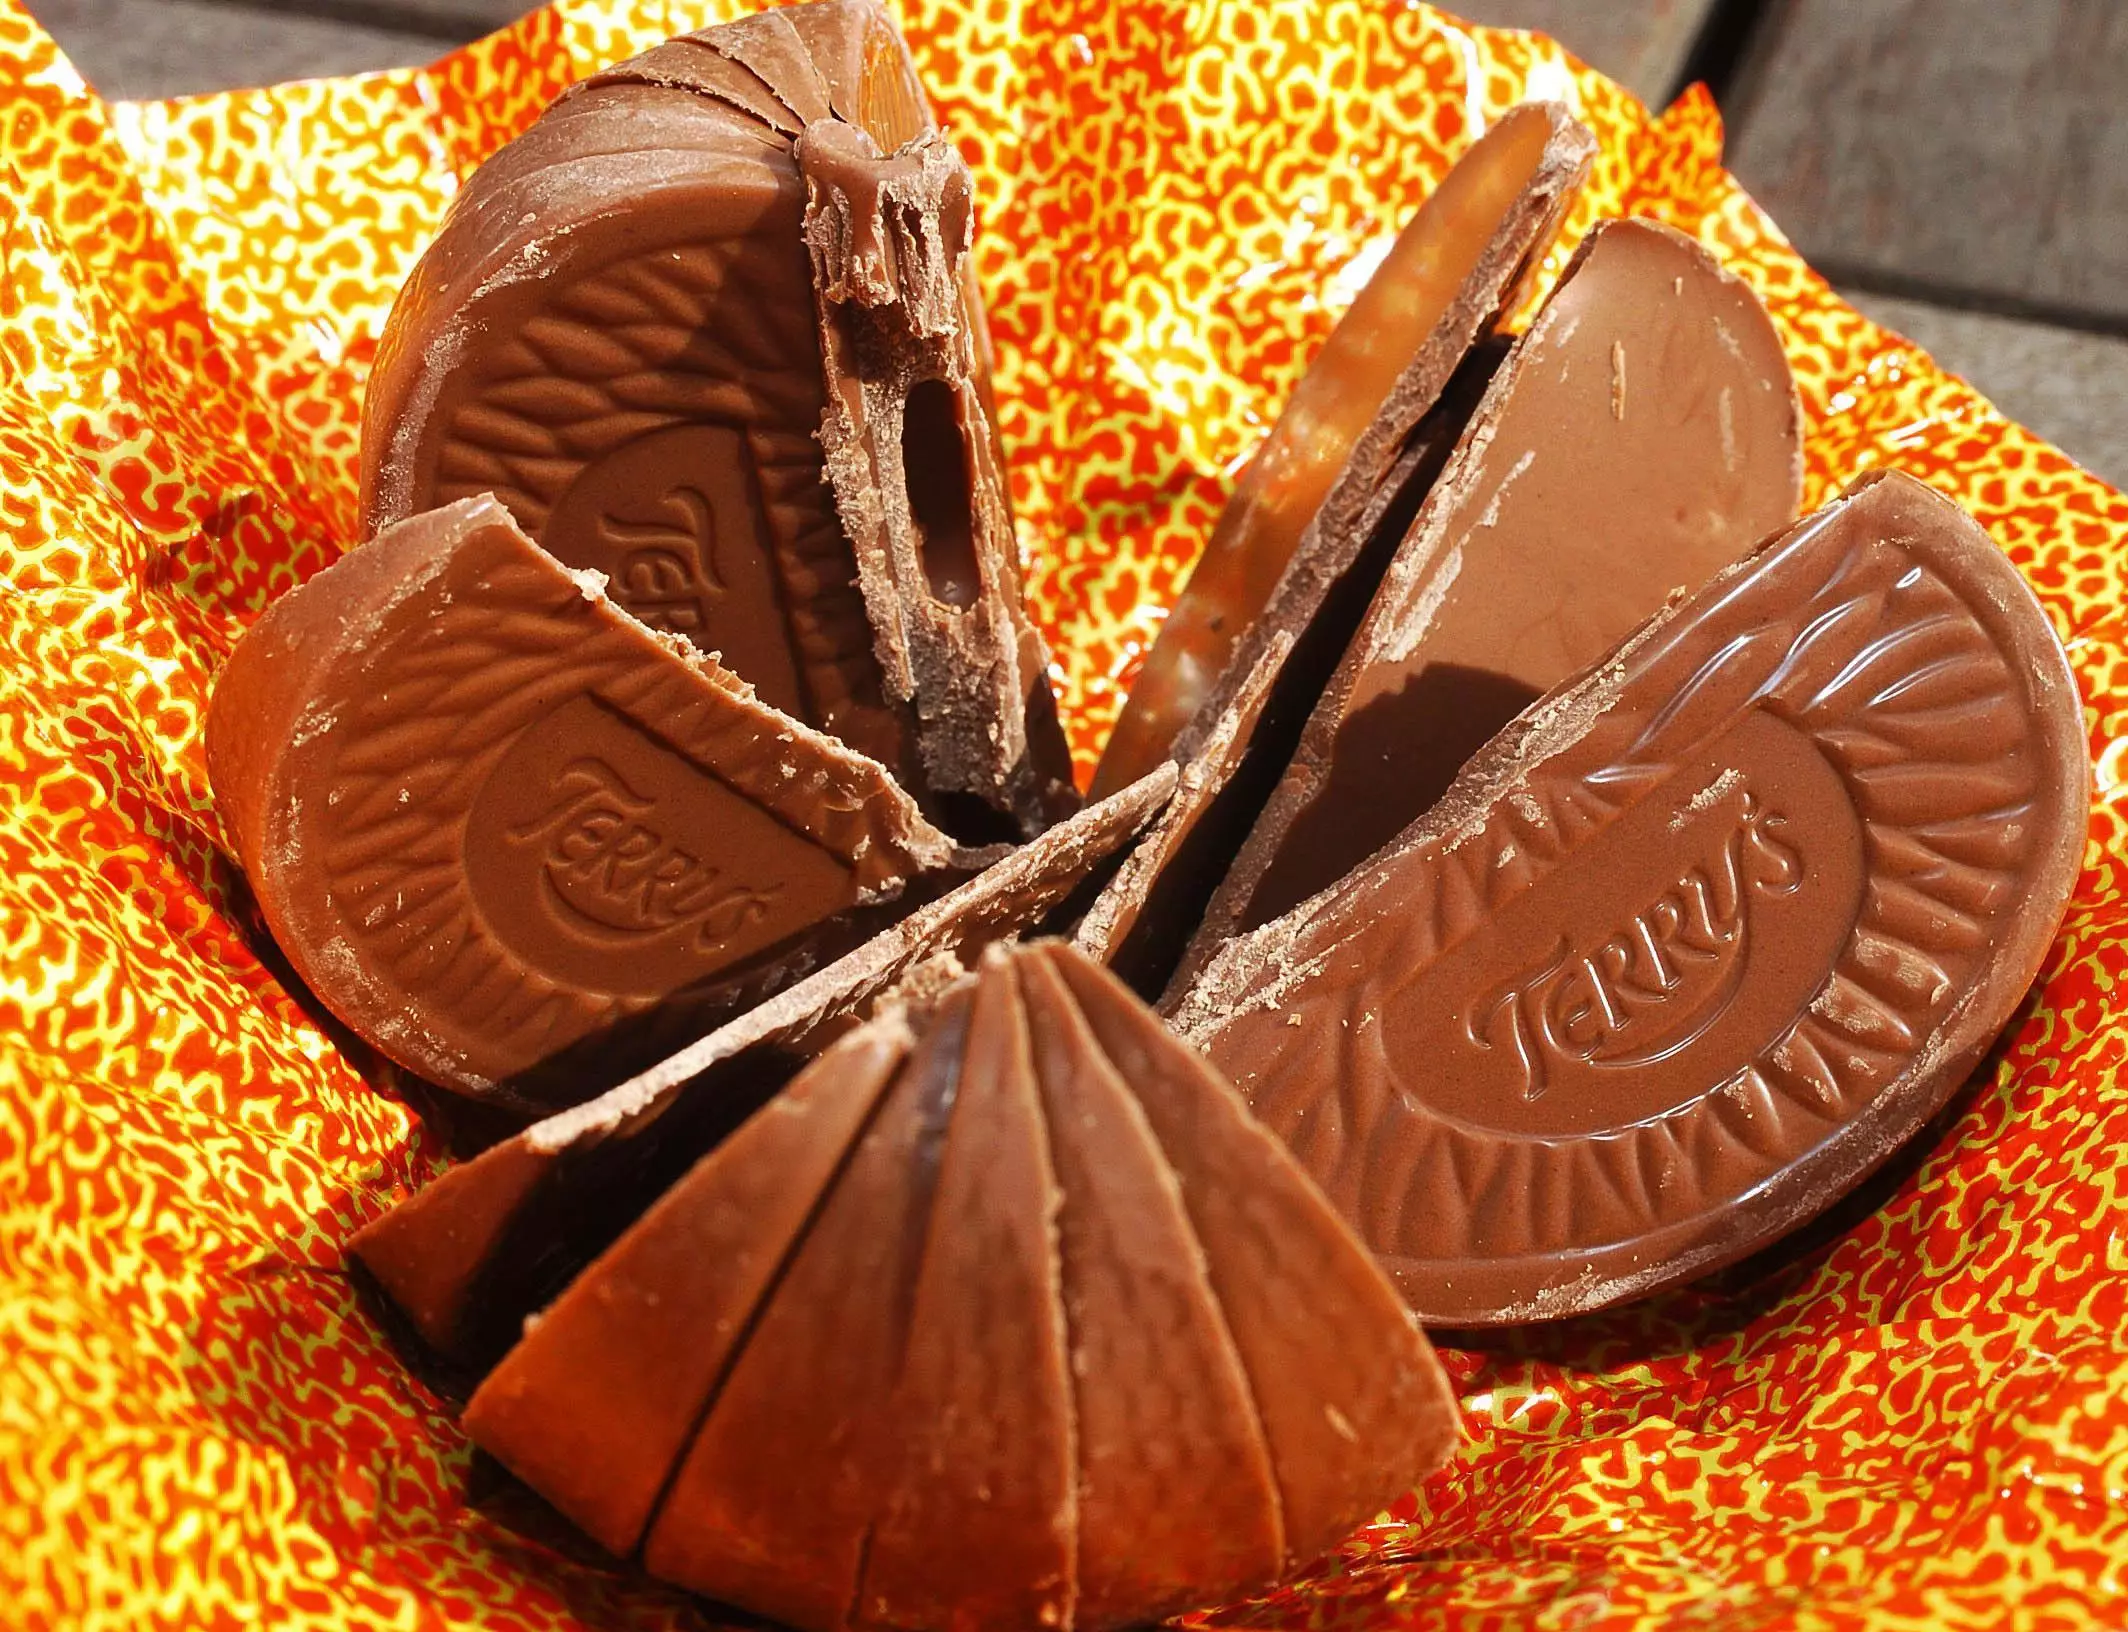 Terry's Chocolate Orange Is Shrinking And The Nation Demands Answers